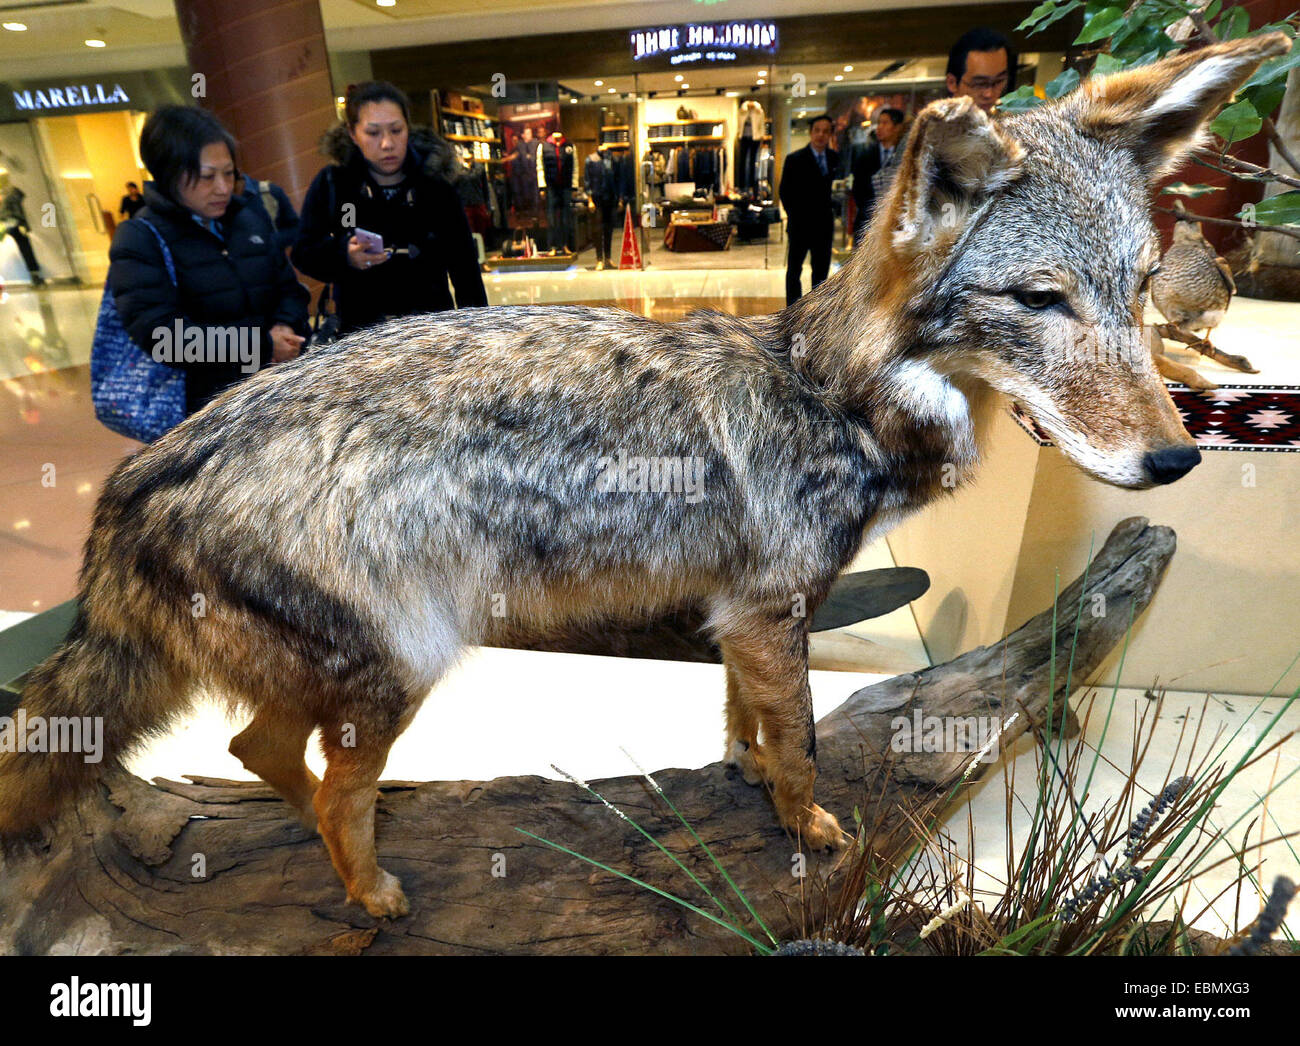 Shanghai, China. 3rd Dec, 2014. A stuffed specimen of coyote is displayed during a rare animal specimen exhibition in the CITIC Square in Shanghai, east China, Dec. 3, 2014. © Chen Fei/Xinhua/Alamy Live News Stock Photo